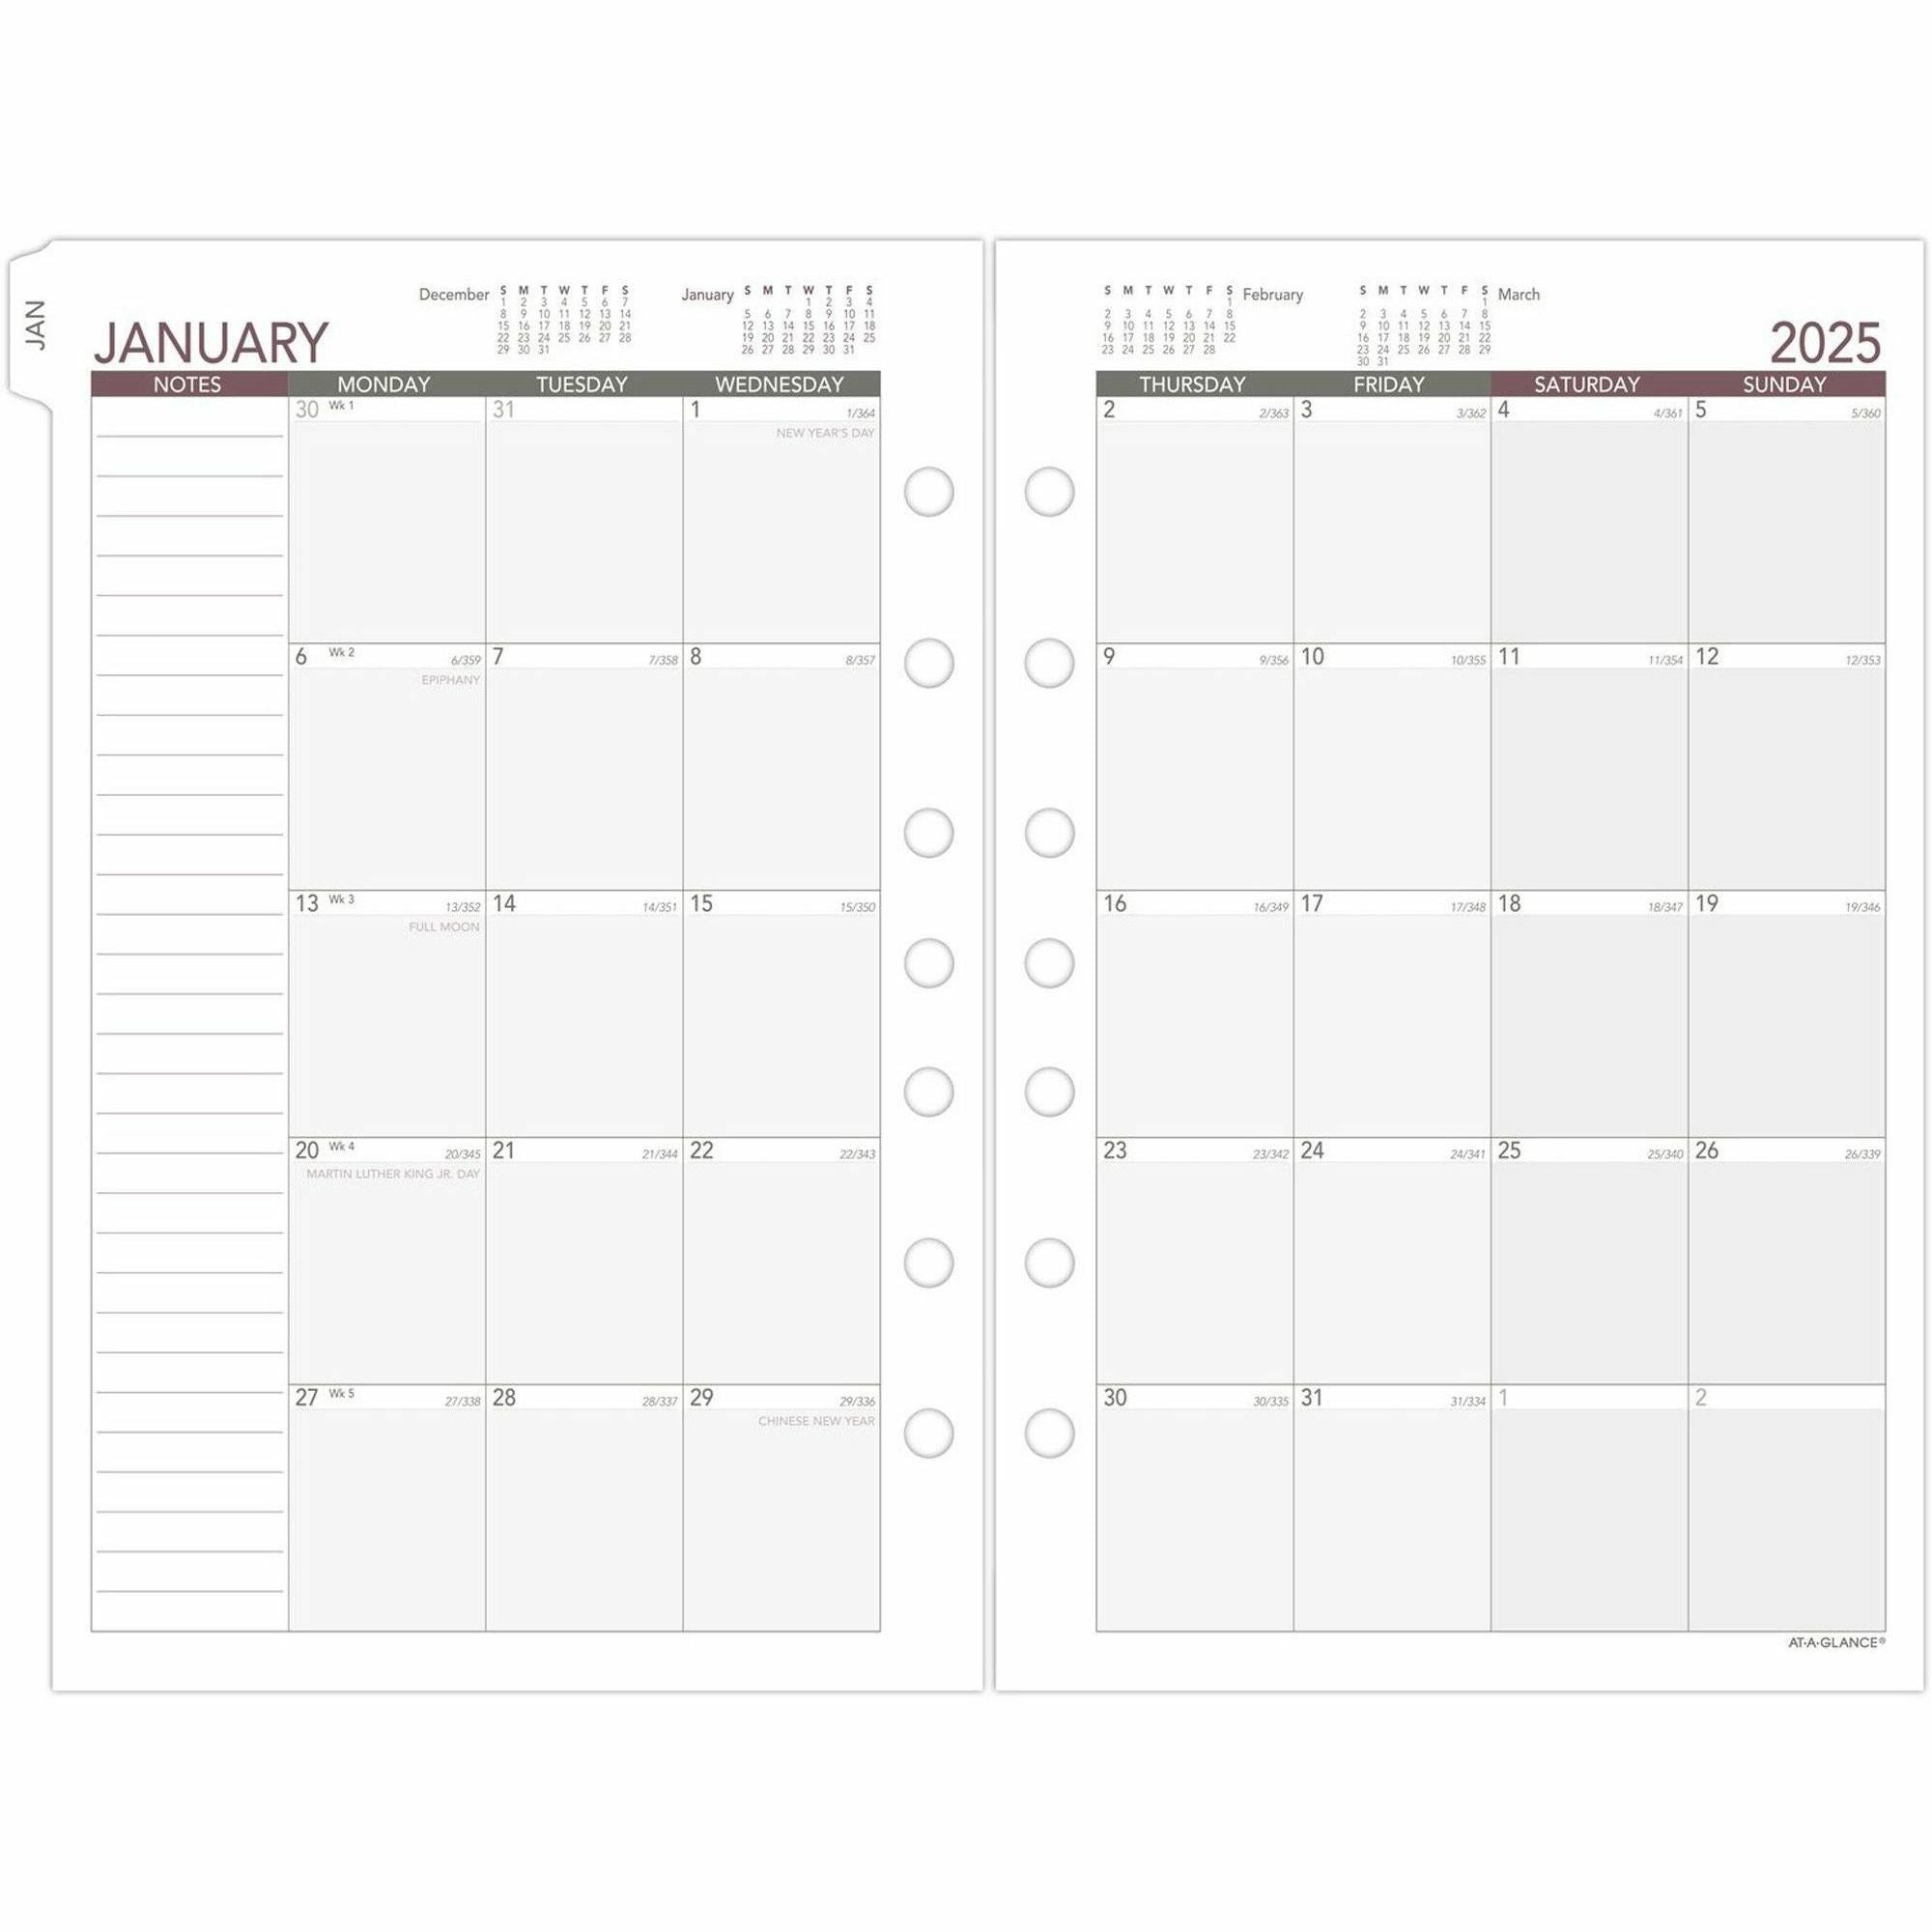 At-A-Glance 2024 Weekly Planner Refill, Loose-Leaf, Desk Size, 5 1/2" x 8 1/2" - Business - Julian Dates - Weekly - 1 Year - January 2024 - December 2024 - 8:00 AM to 5:00 PM - Hourly, Monday - Friday - 1 Week Double Page Layout - 5 1/2" x 8 1/2" She - 3